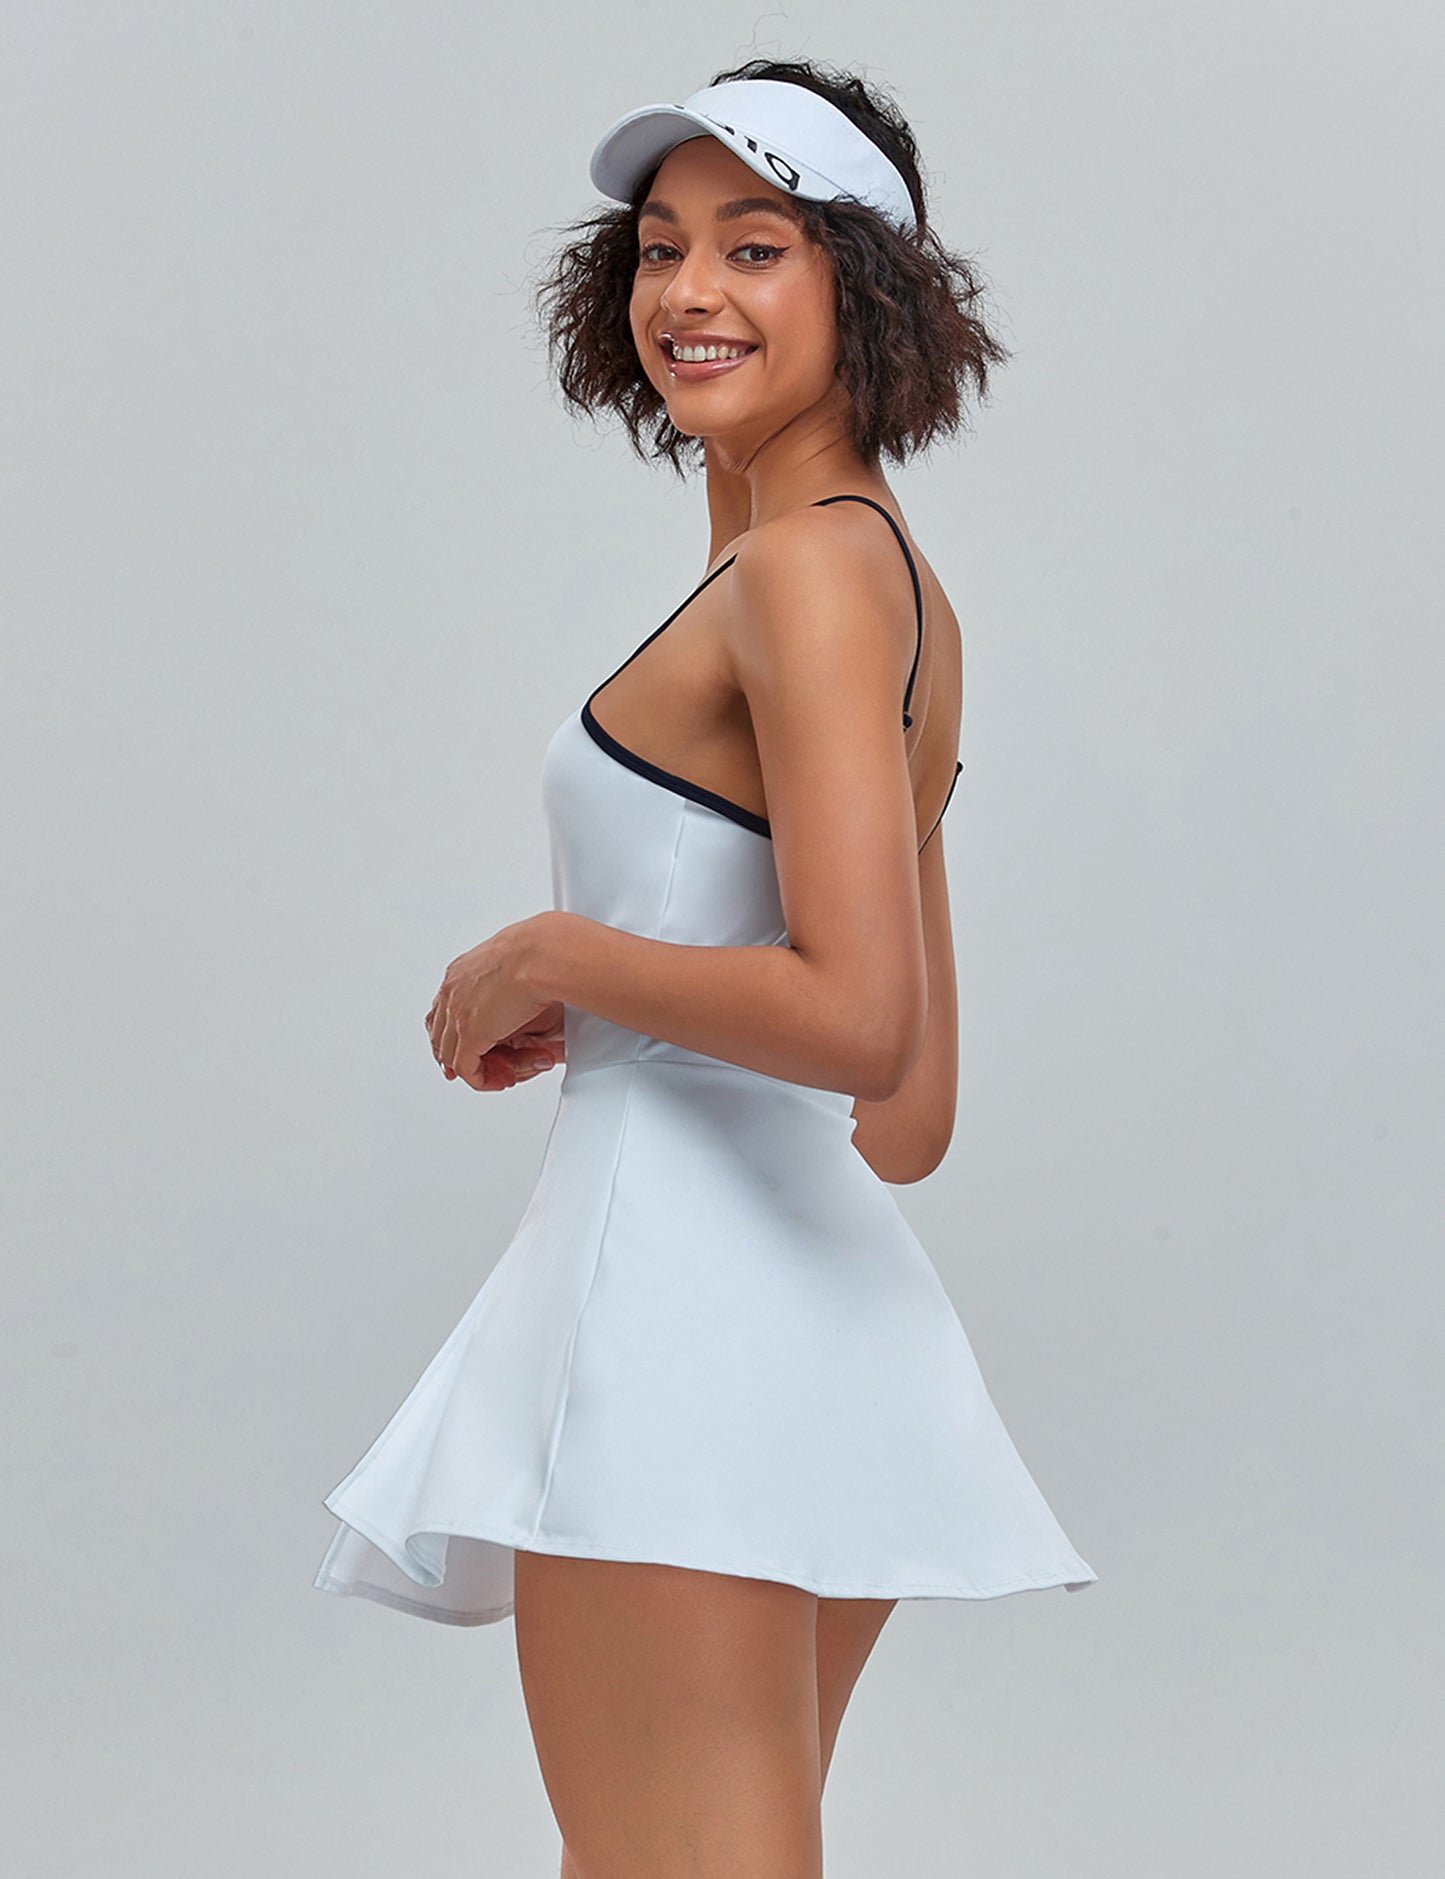 1a1a™  Pithy Tennis Dress with Liner Shorts